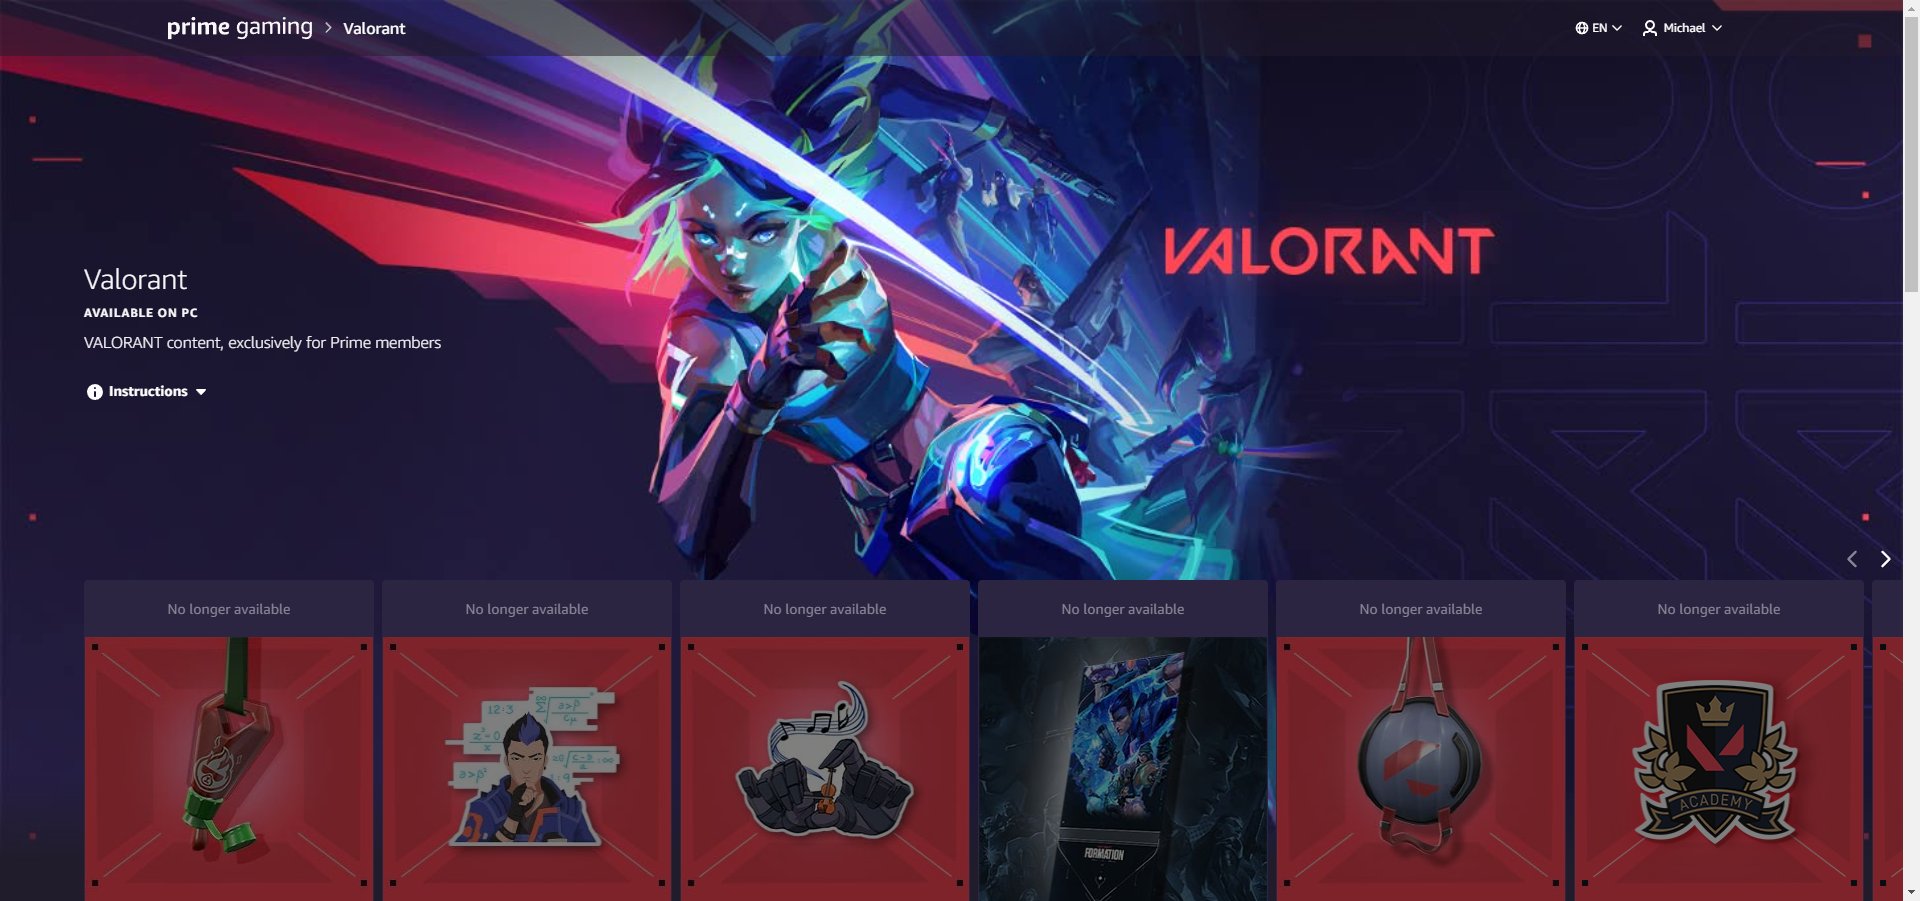 Mike, Valorant Leaks & News on X: You can now get the Arcane Jinx  Playercard through Prime Gaming